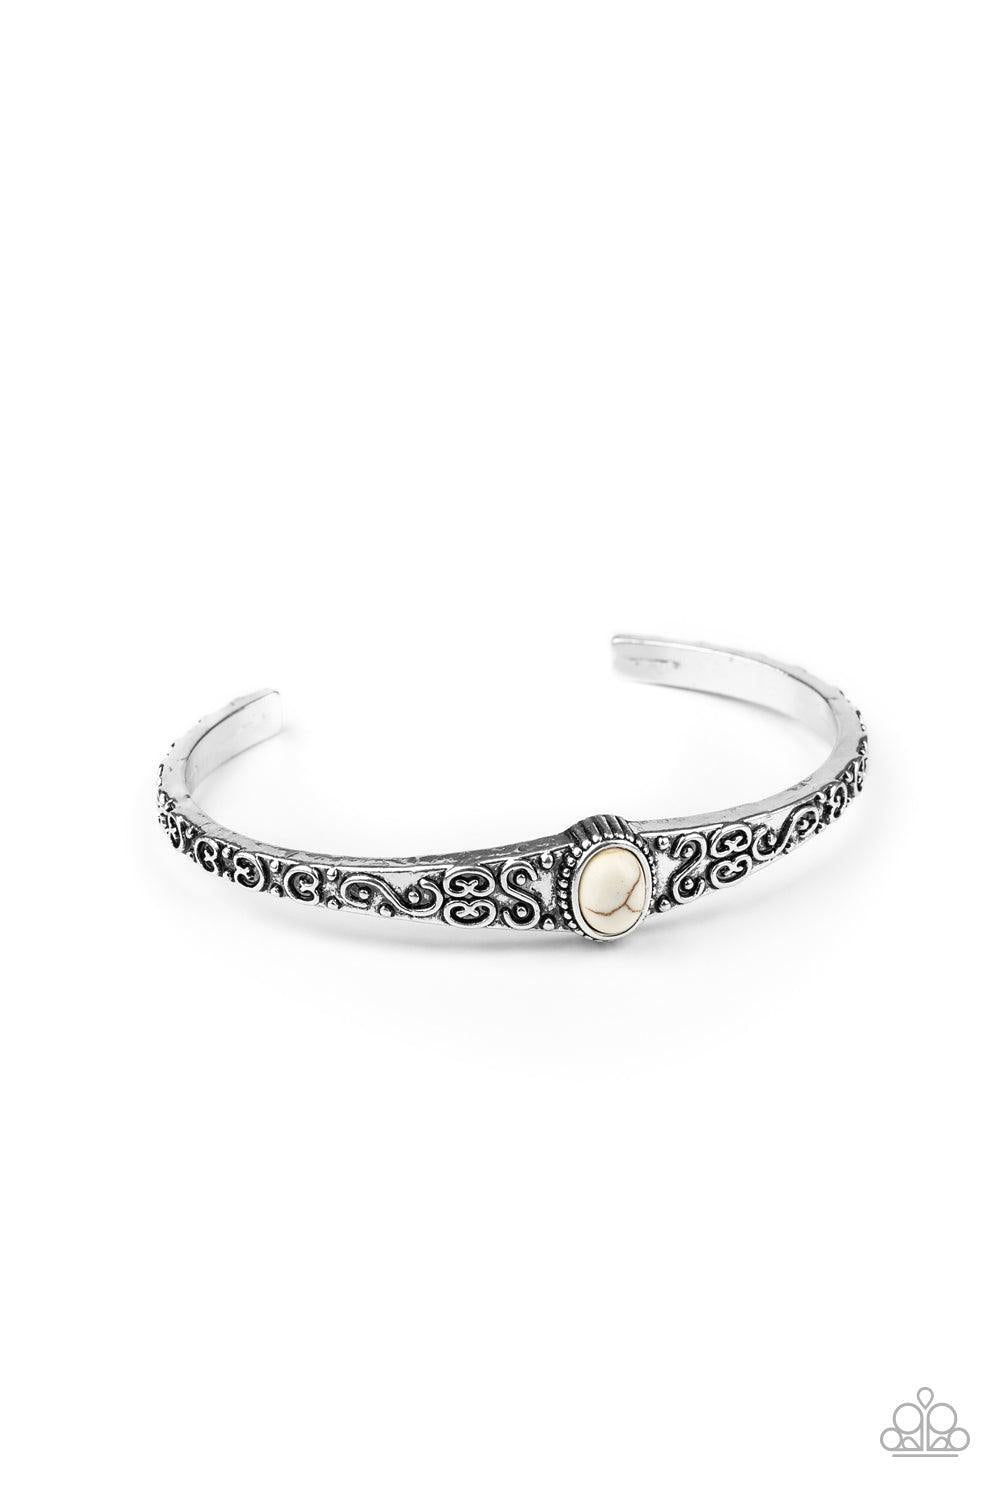 Paparazzi Accessories Make Your Own Path - White Infused with a refreshing white stone center, a dainty silver cuff has been embossed in swirling antiqued detail for a seasonal look. Sold as one individual bracelet. Jewelry